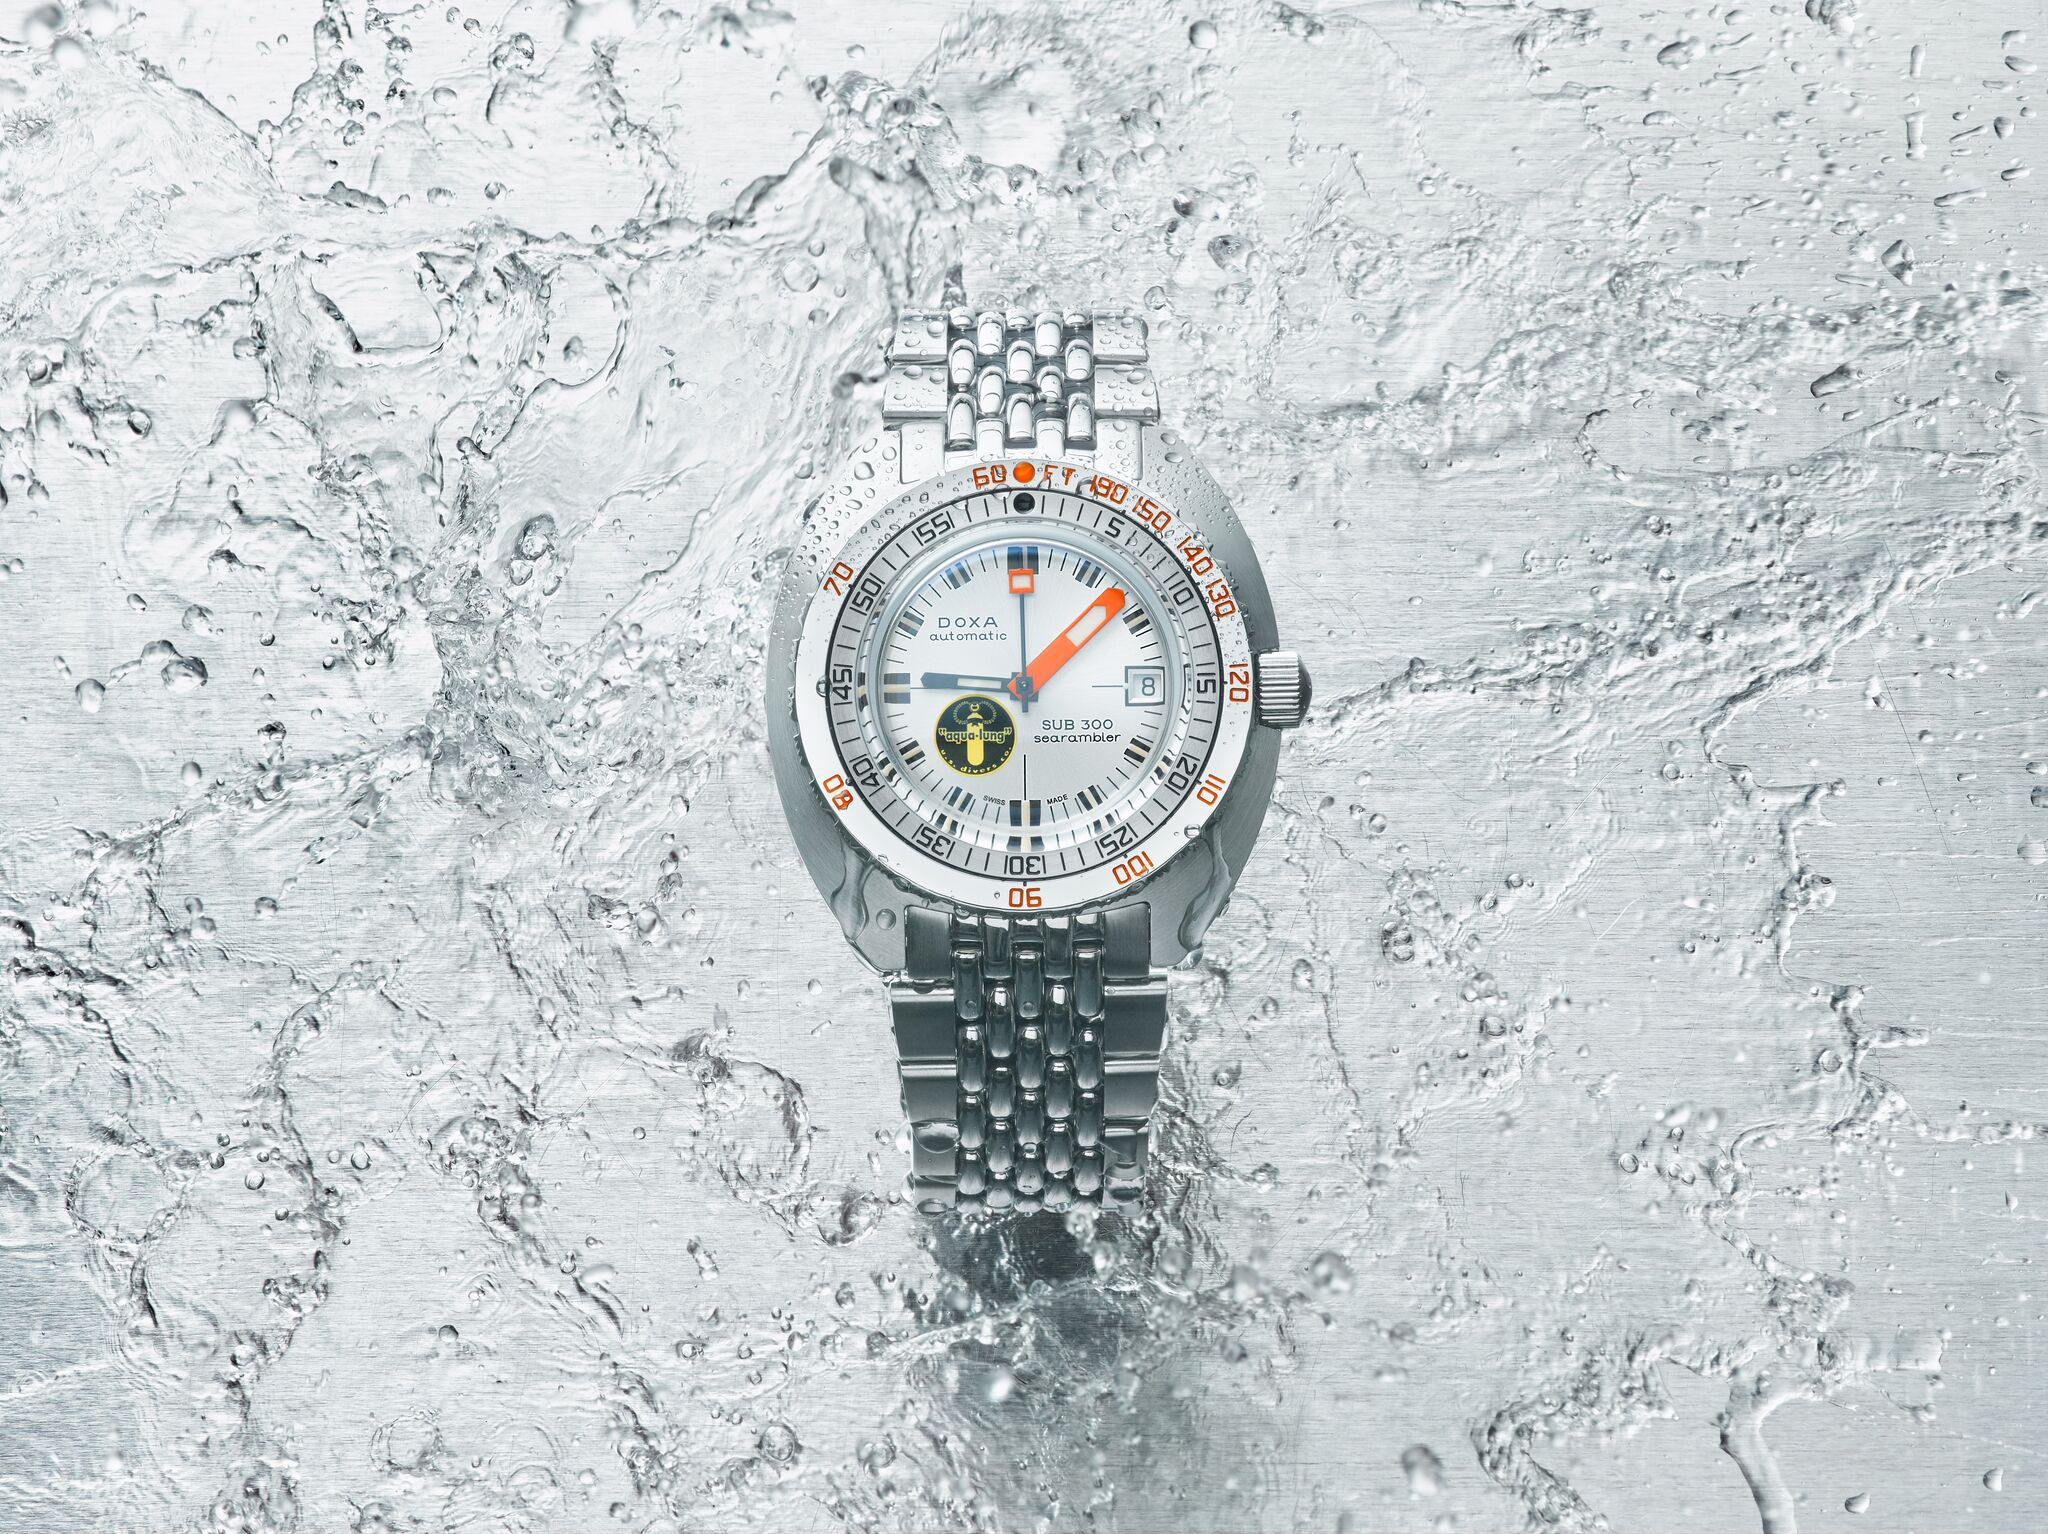 DOXA released the SUB 300 Silver Lung today